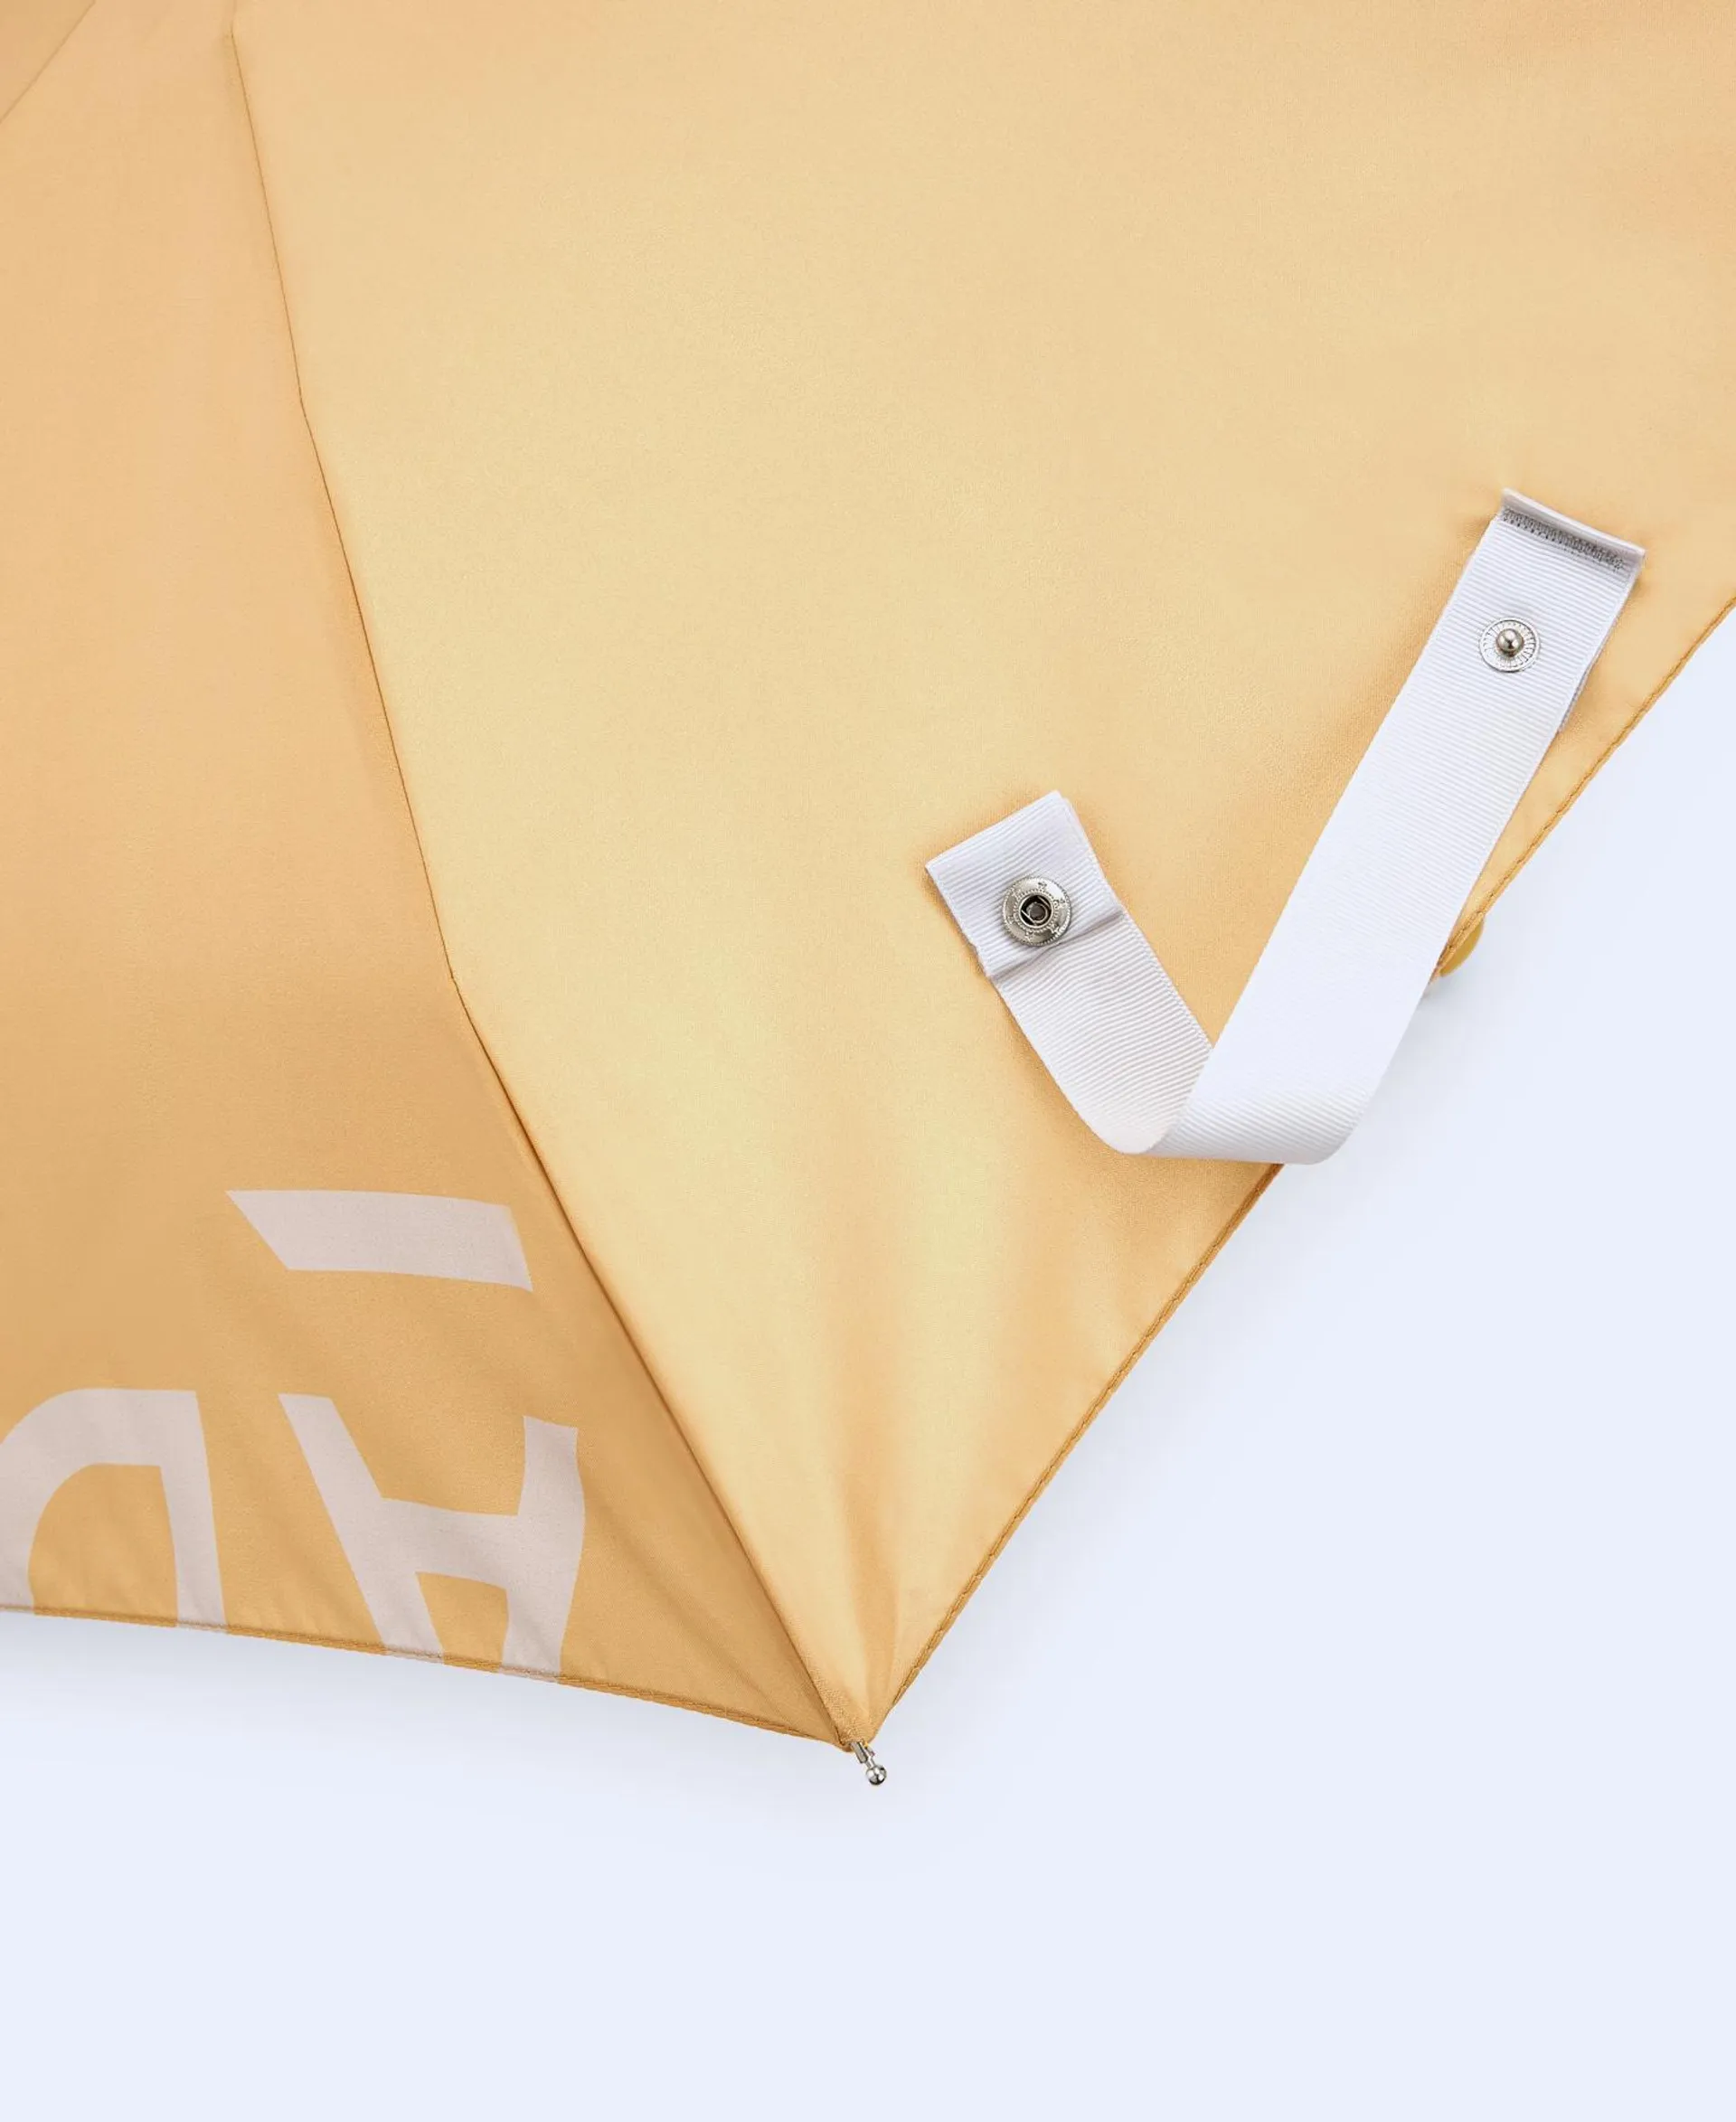 Steel and polyester folding umbrella